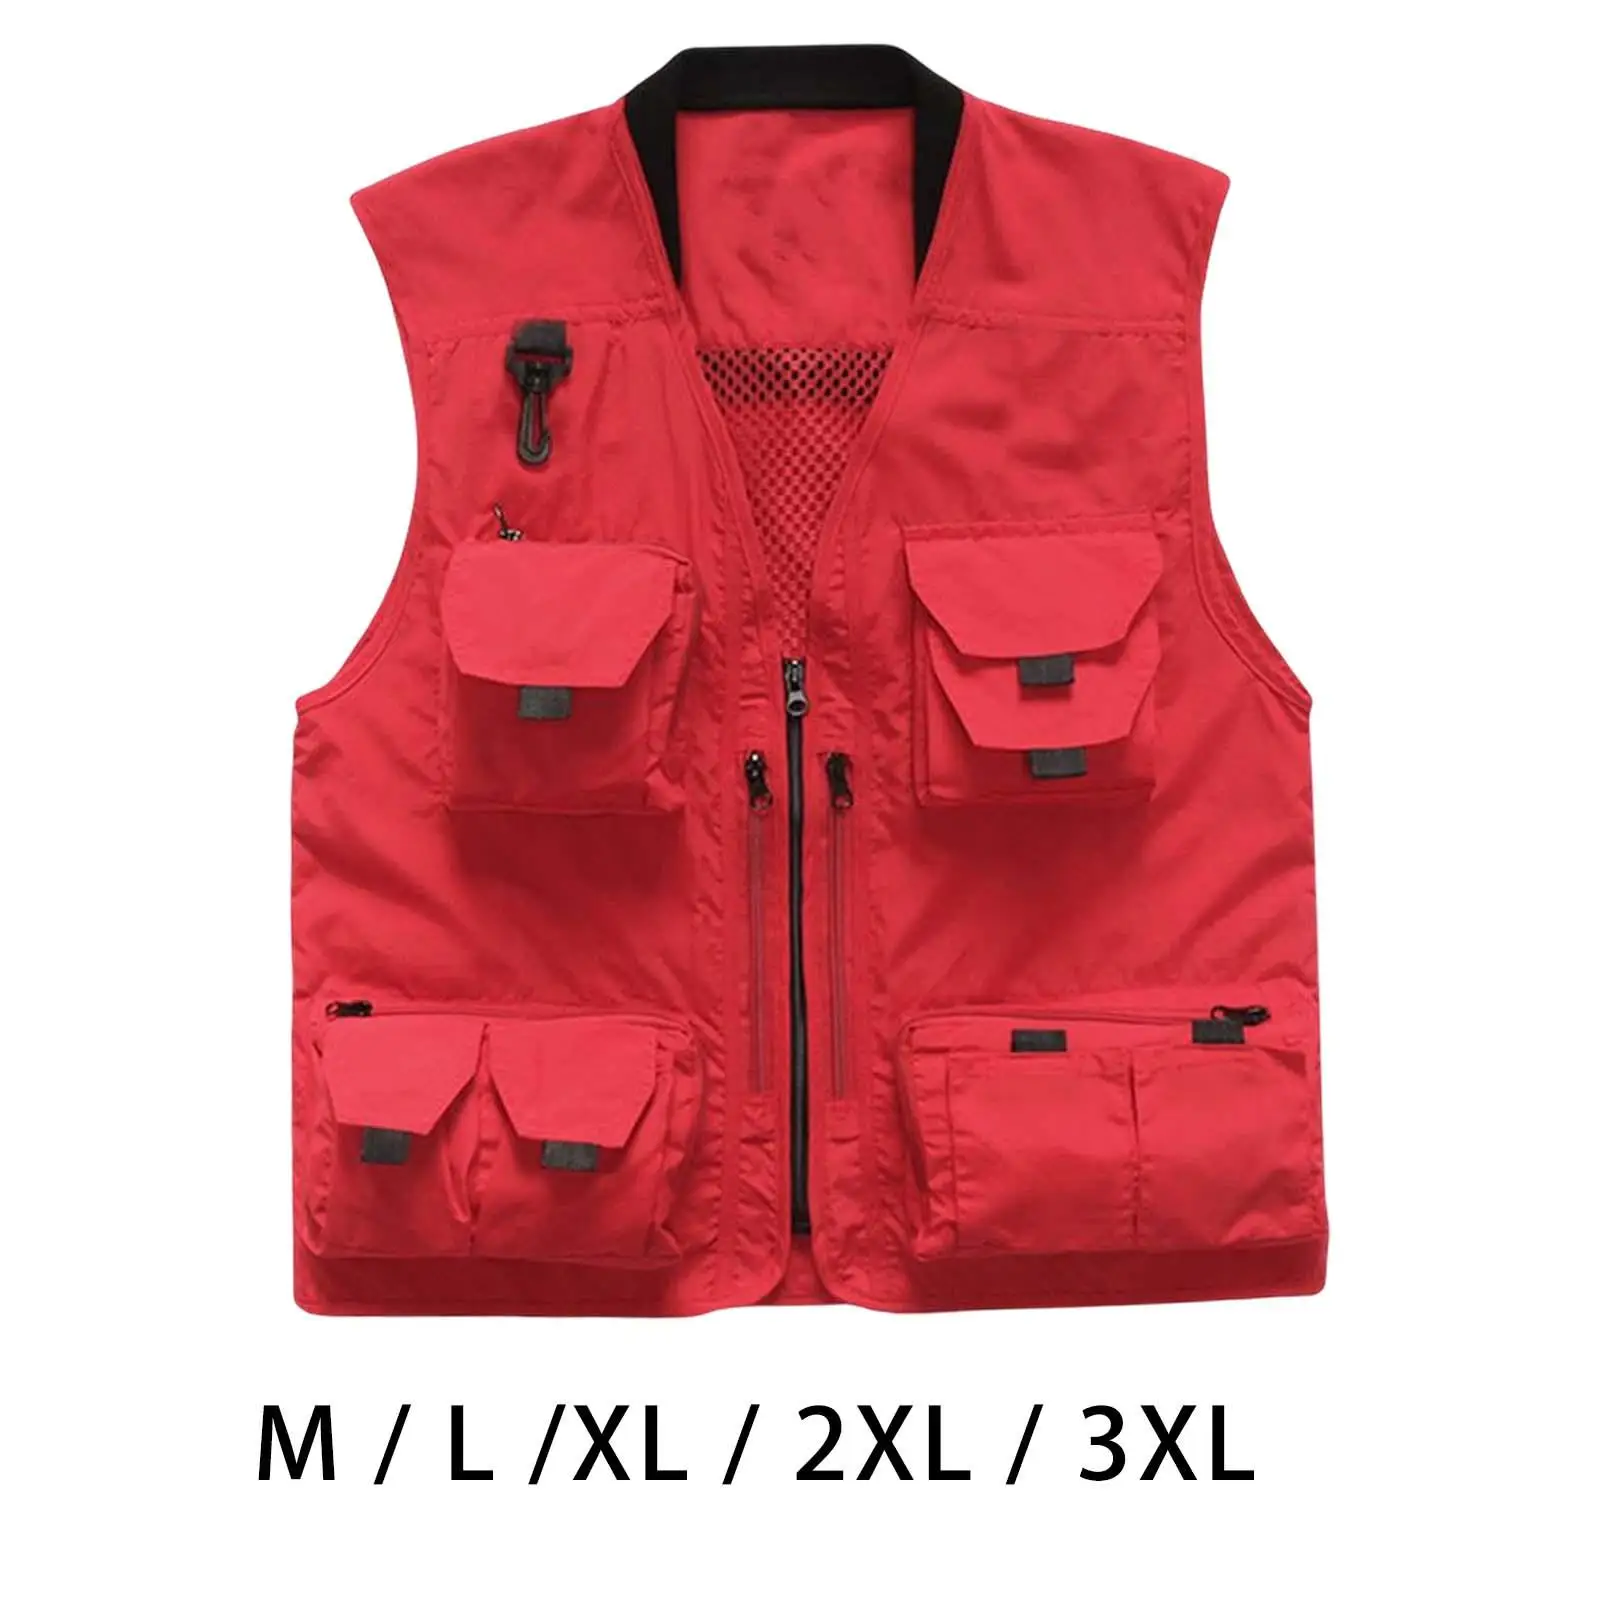 Fishing Vest Lightweight with Multi Pockets Camping Outdoor Activities